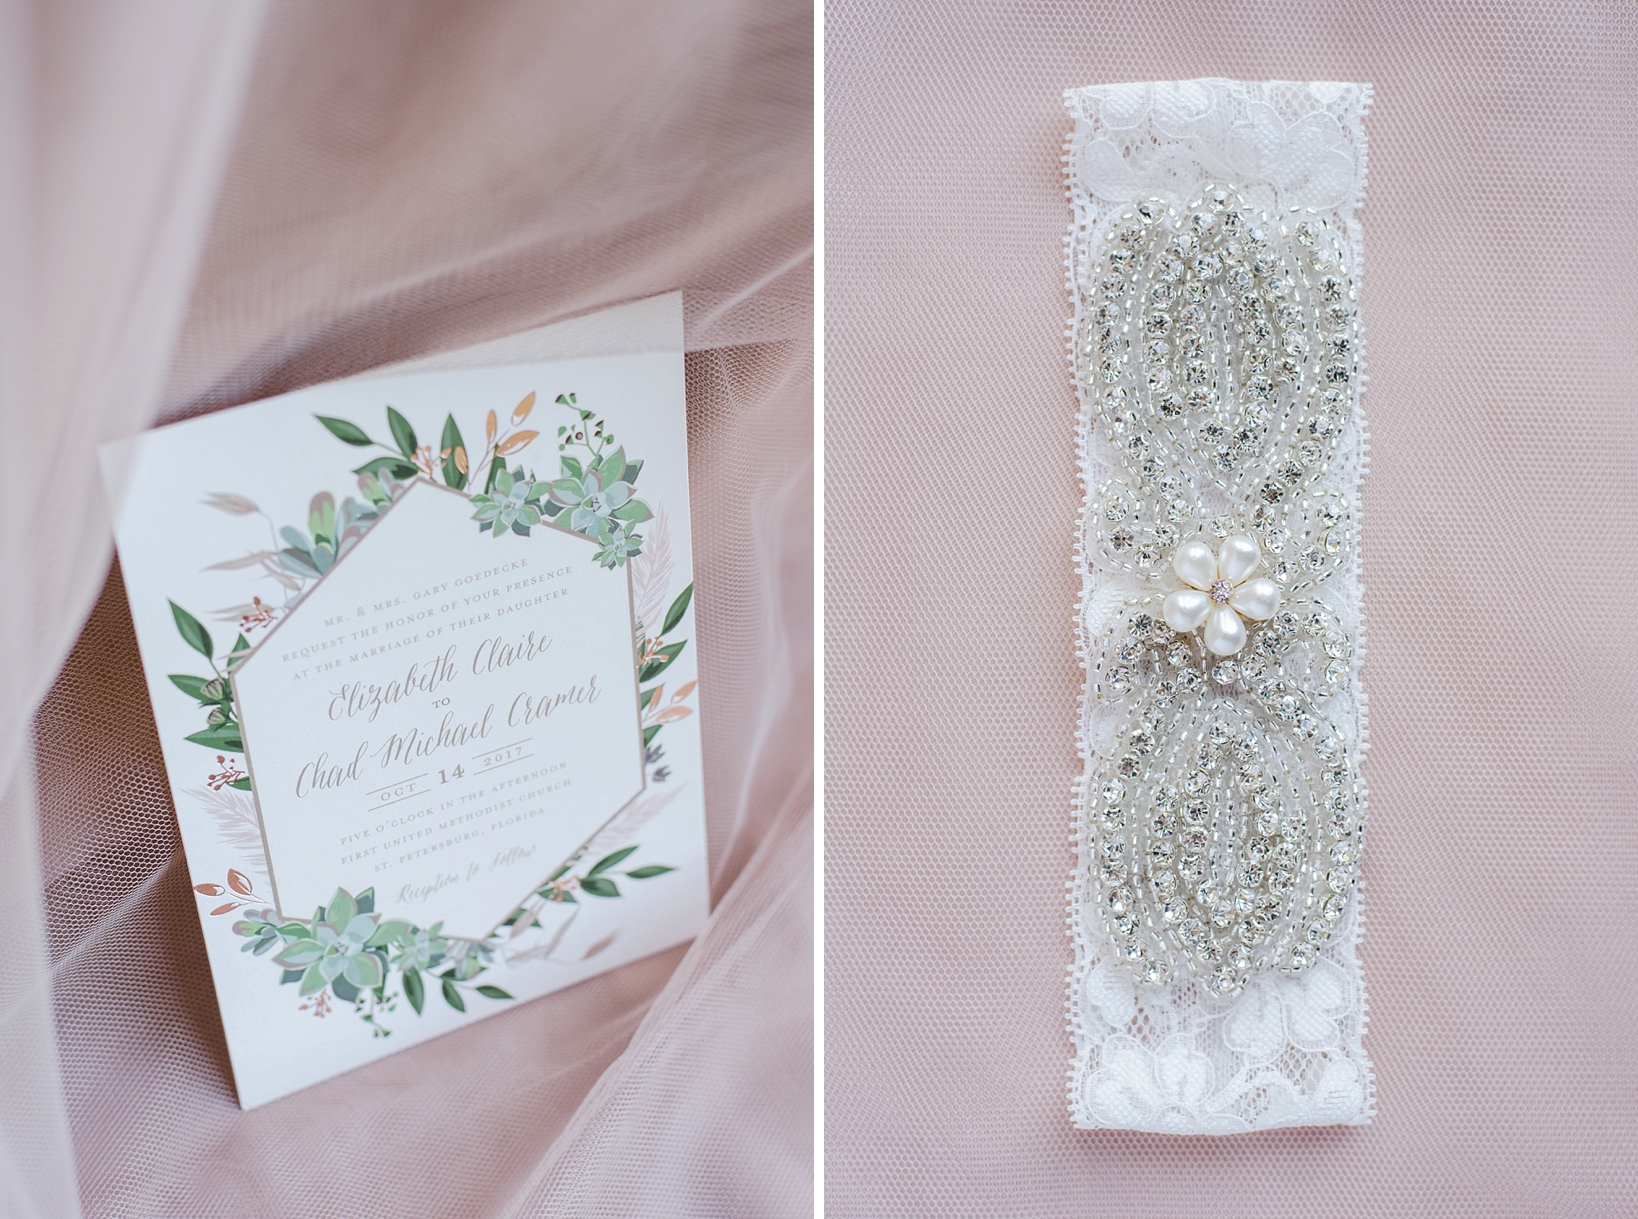 Wedding invitation and pearl and diamond encrusted garter against a blush background